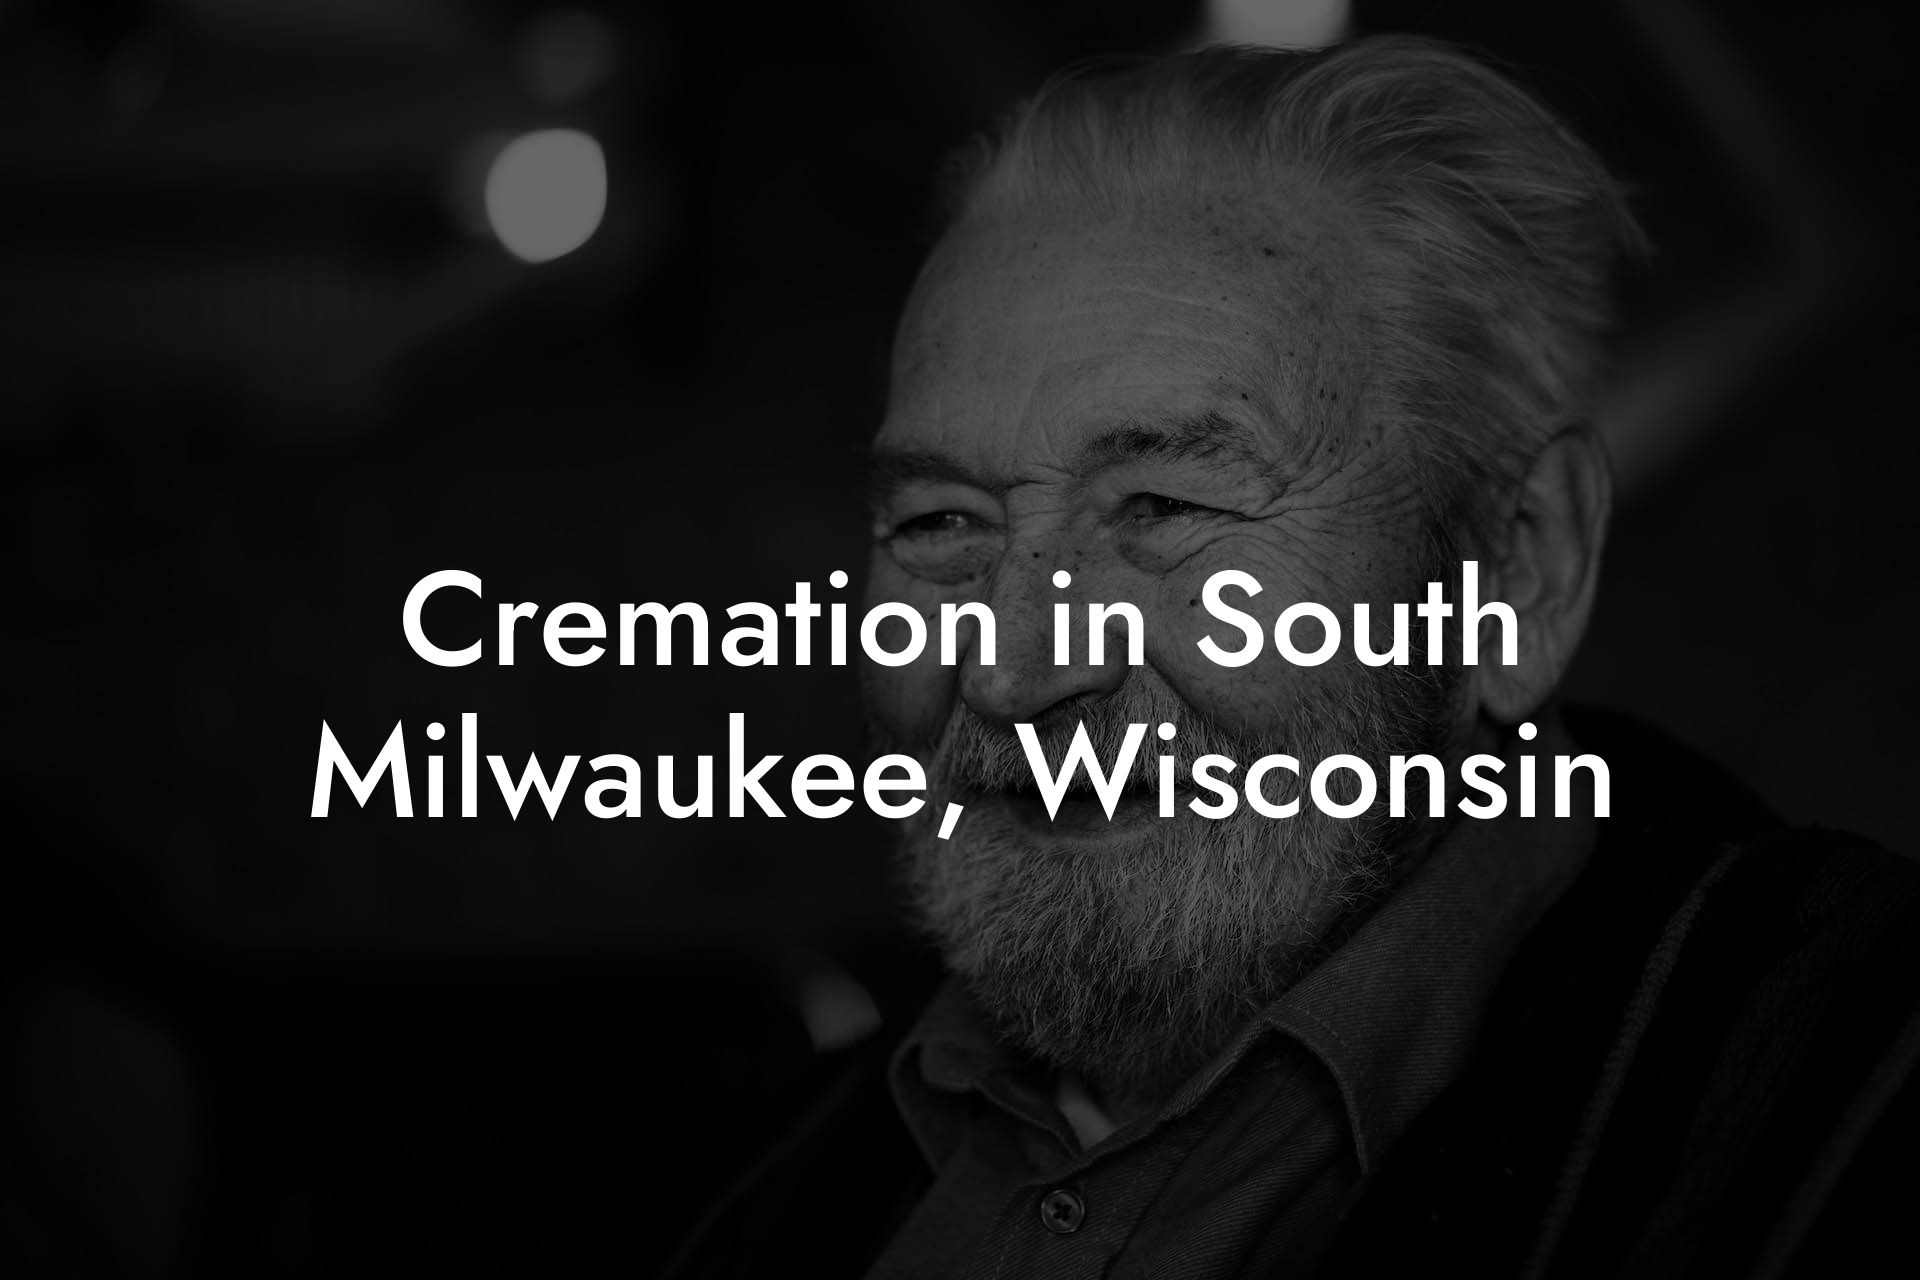 Cremation in South Milwaukee, Wisconsin